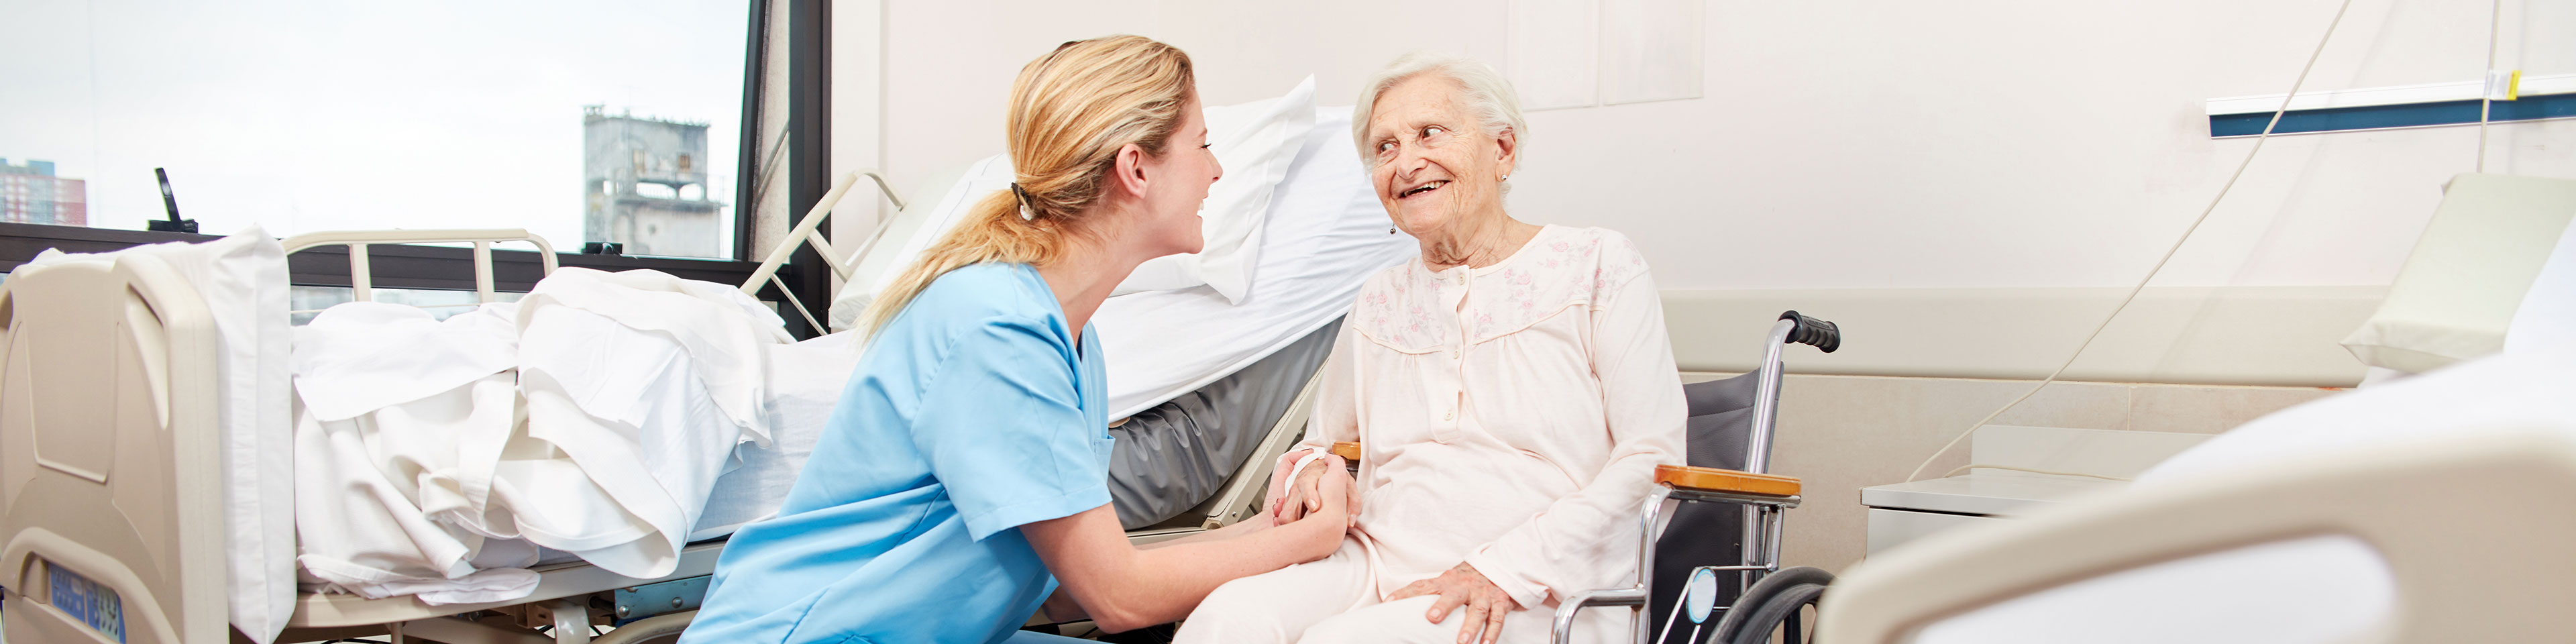 Study: Patient Satisfaction Grows with Nurse Staffing